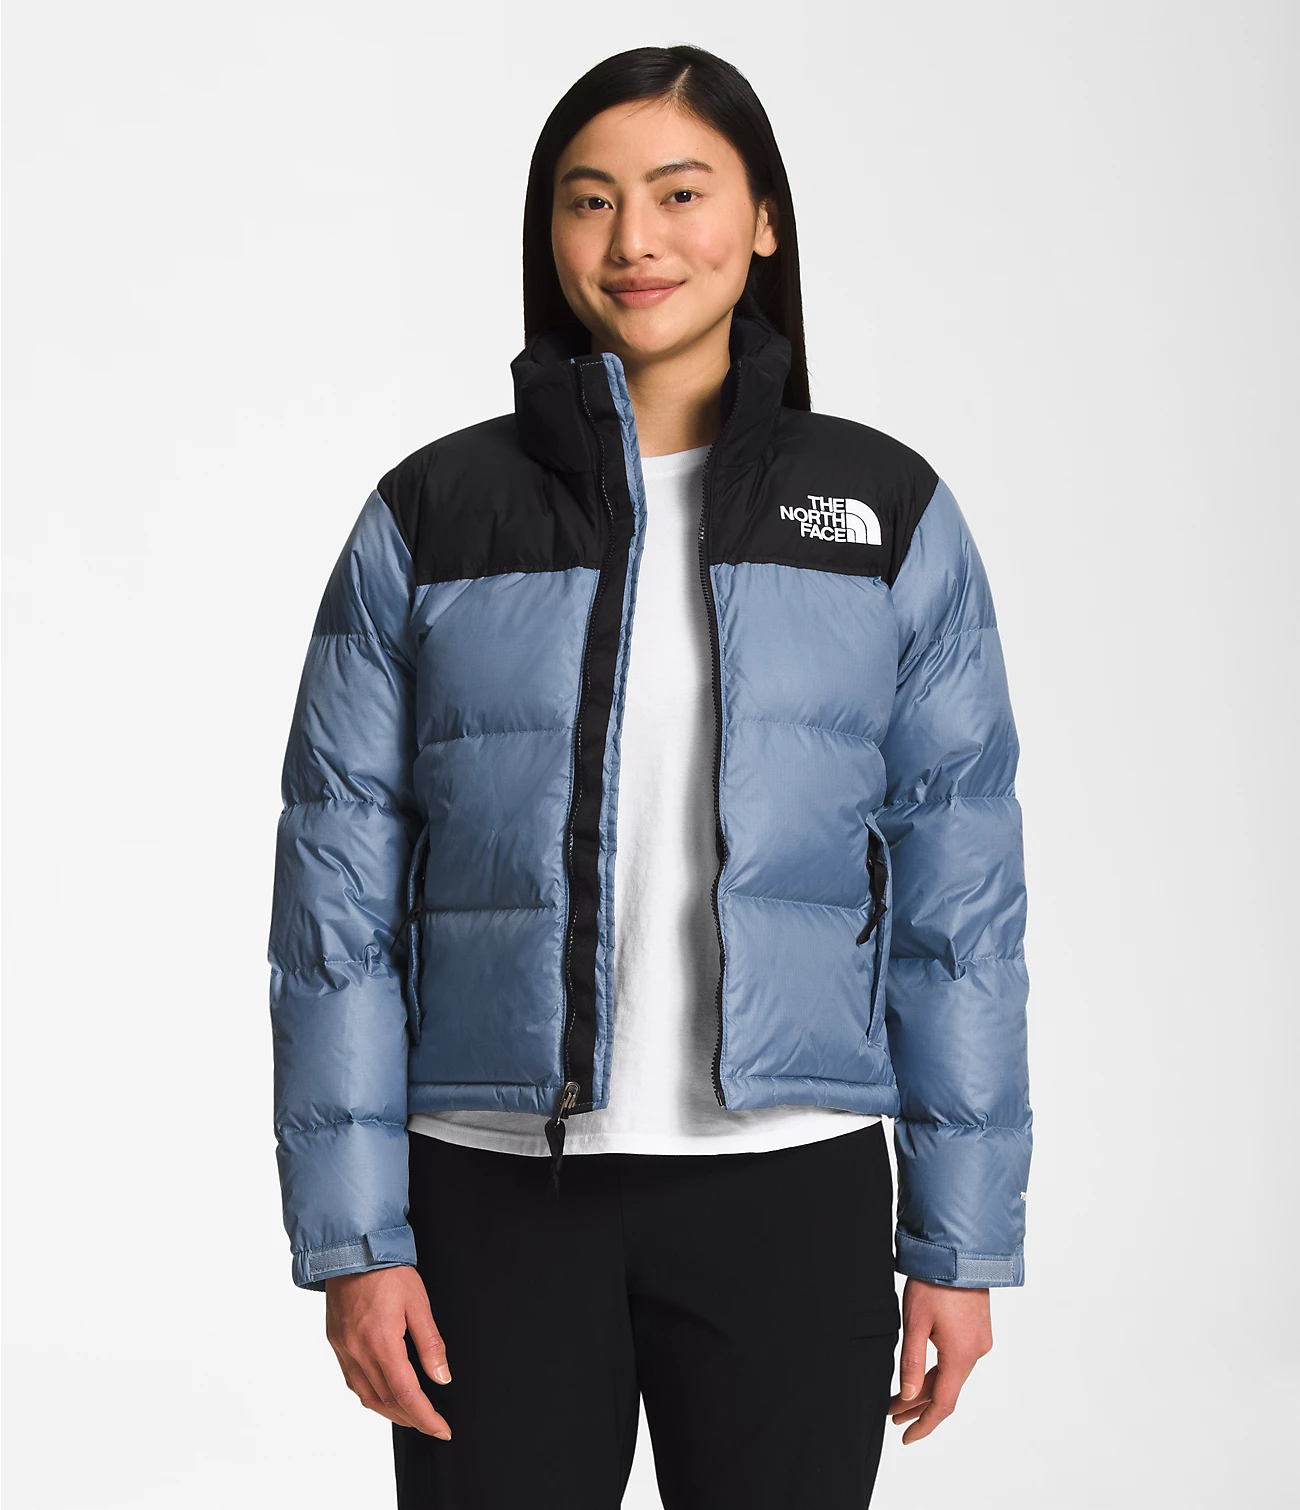 Existence gift Degree Celsius Best North Face Jackets To Wear Winter Reviews 2022